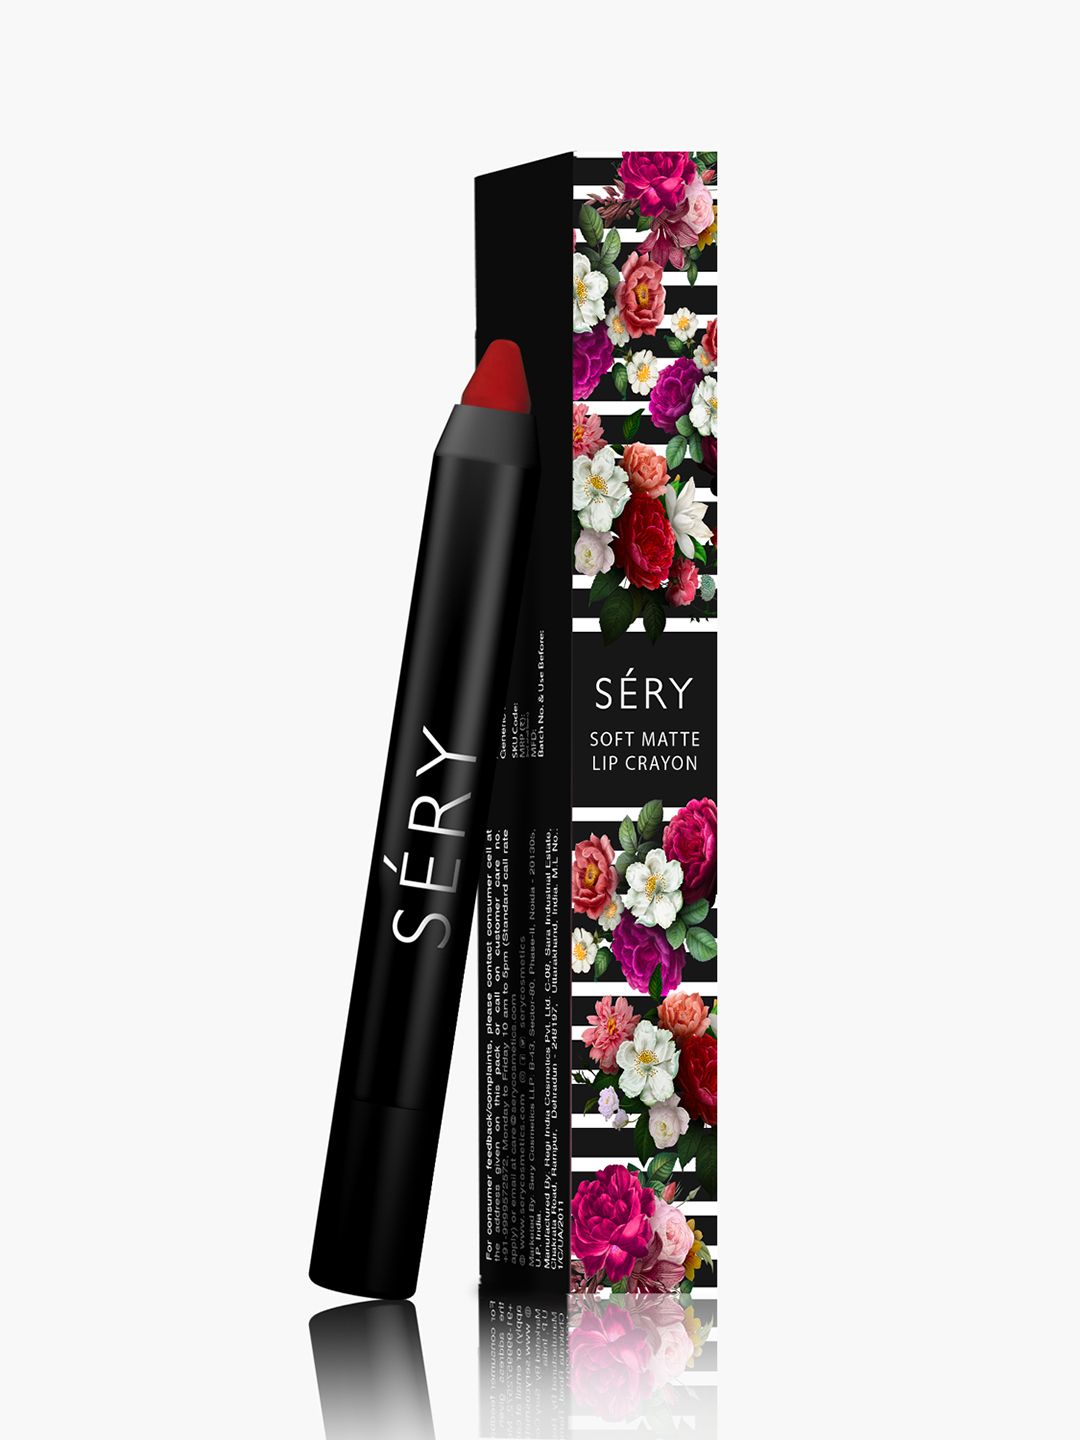 SERY Soft Matte Lip Crayon with Creamy Matte Texture 2.4 g - Stay Wine Price in India